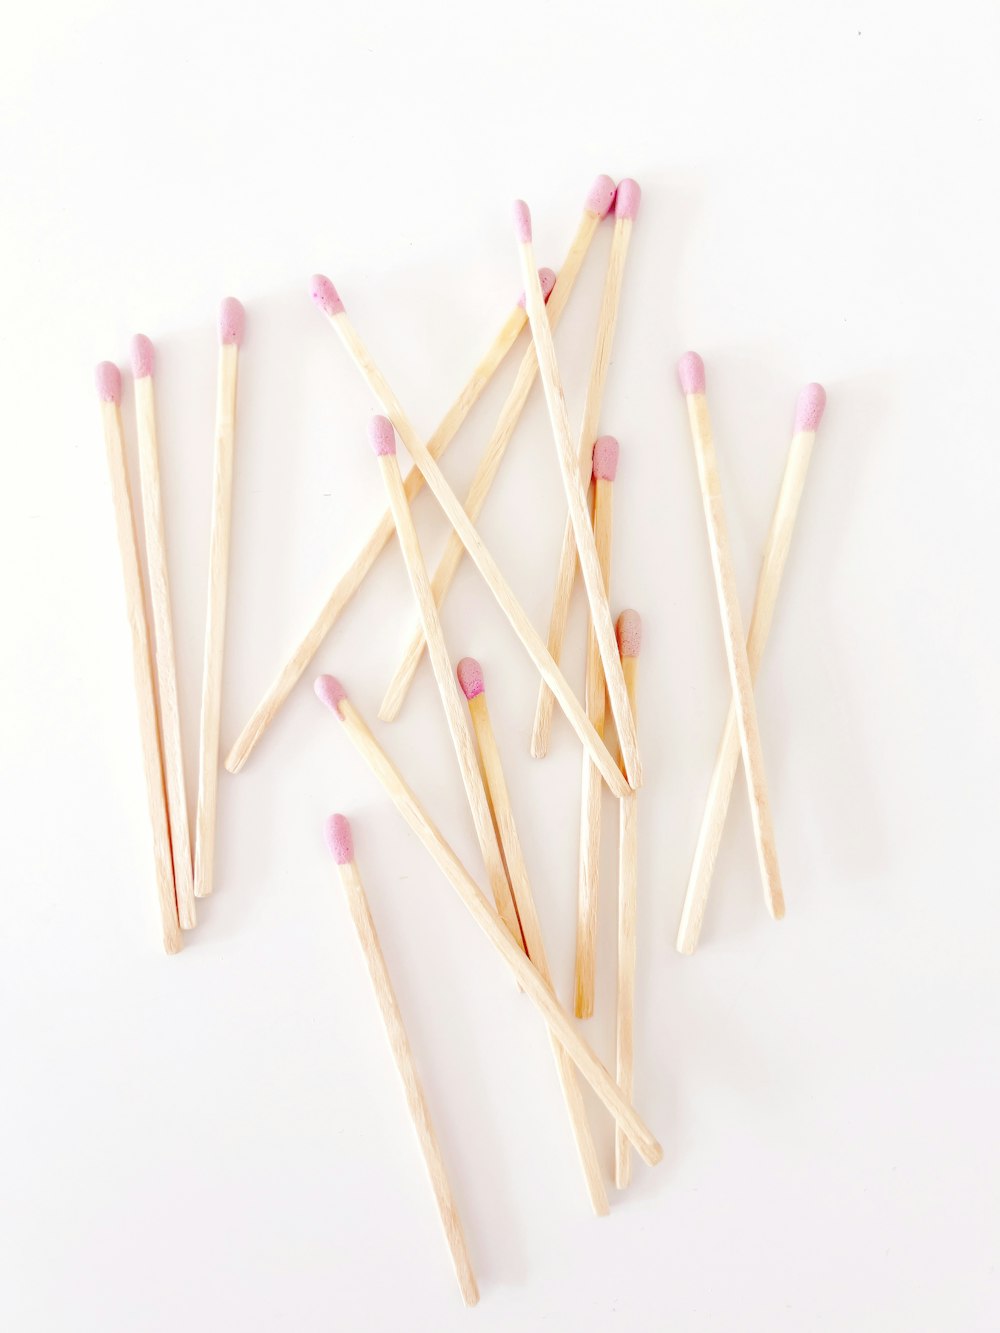 a group of matches on a white background